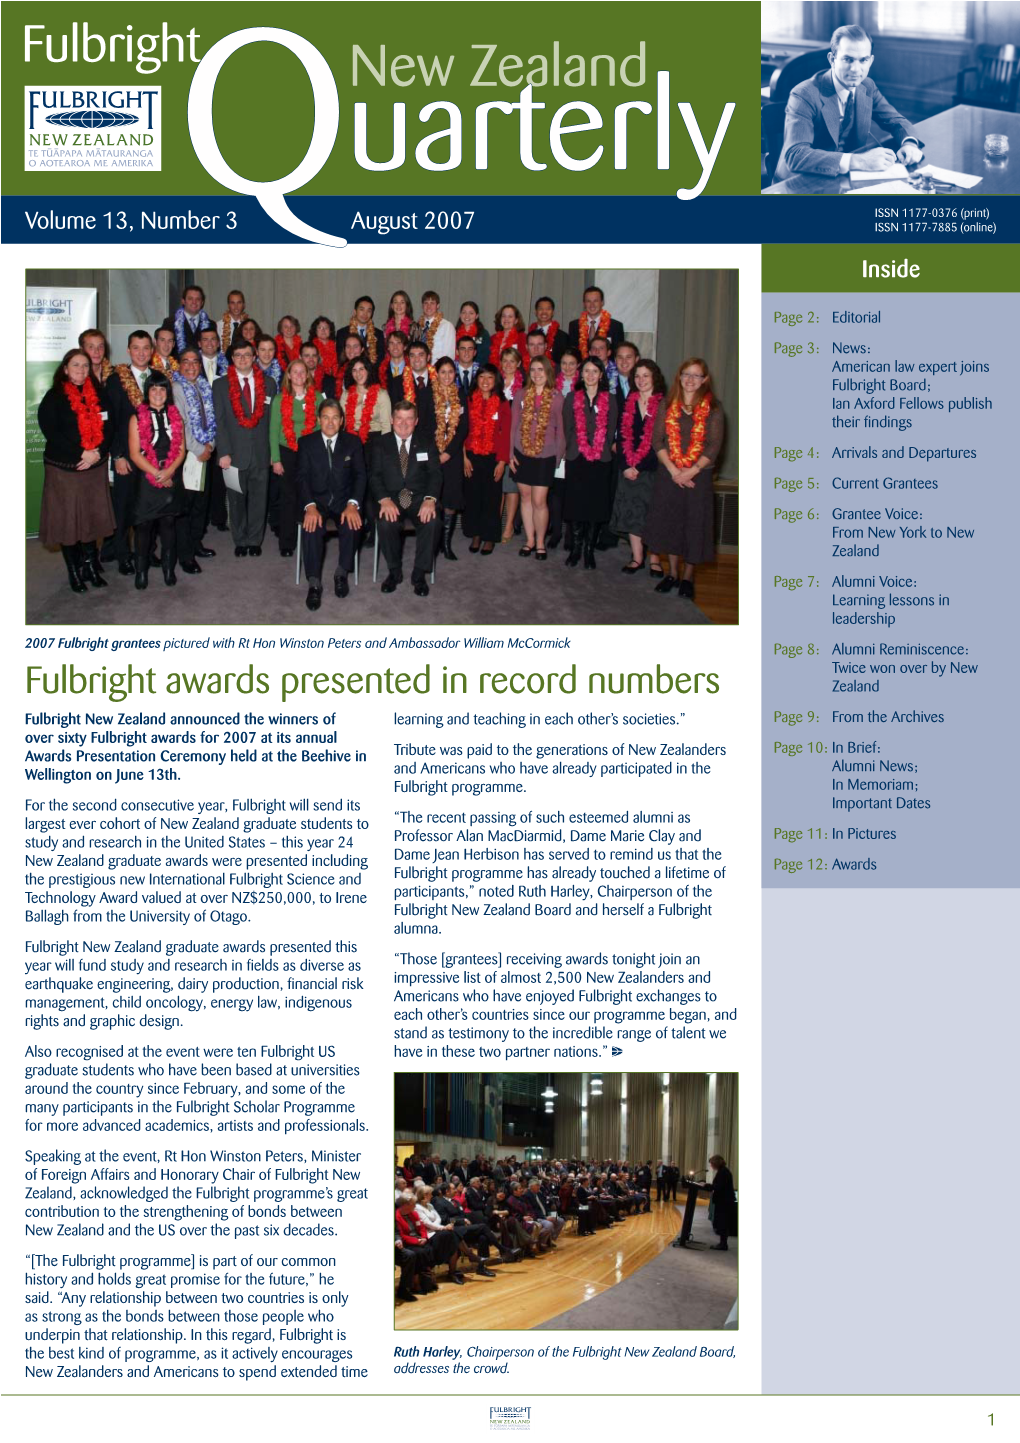 Fulbright New Zealand Quarterly, August 2007